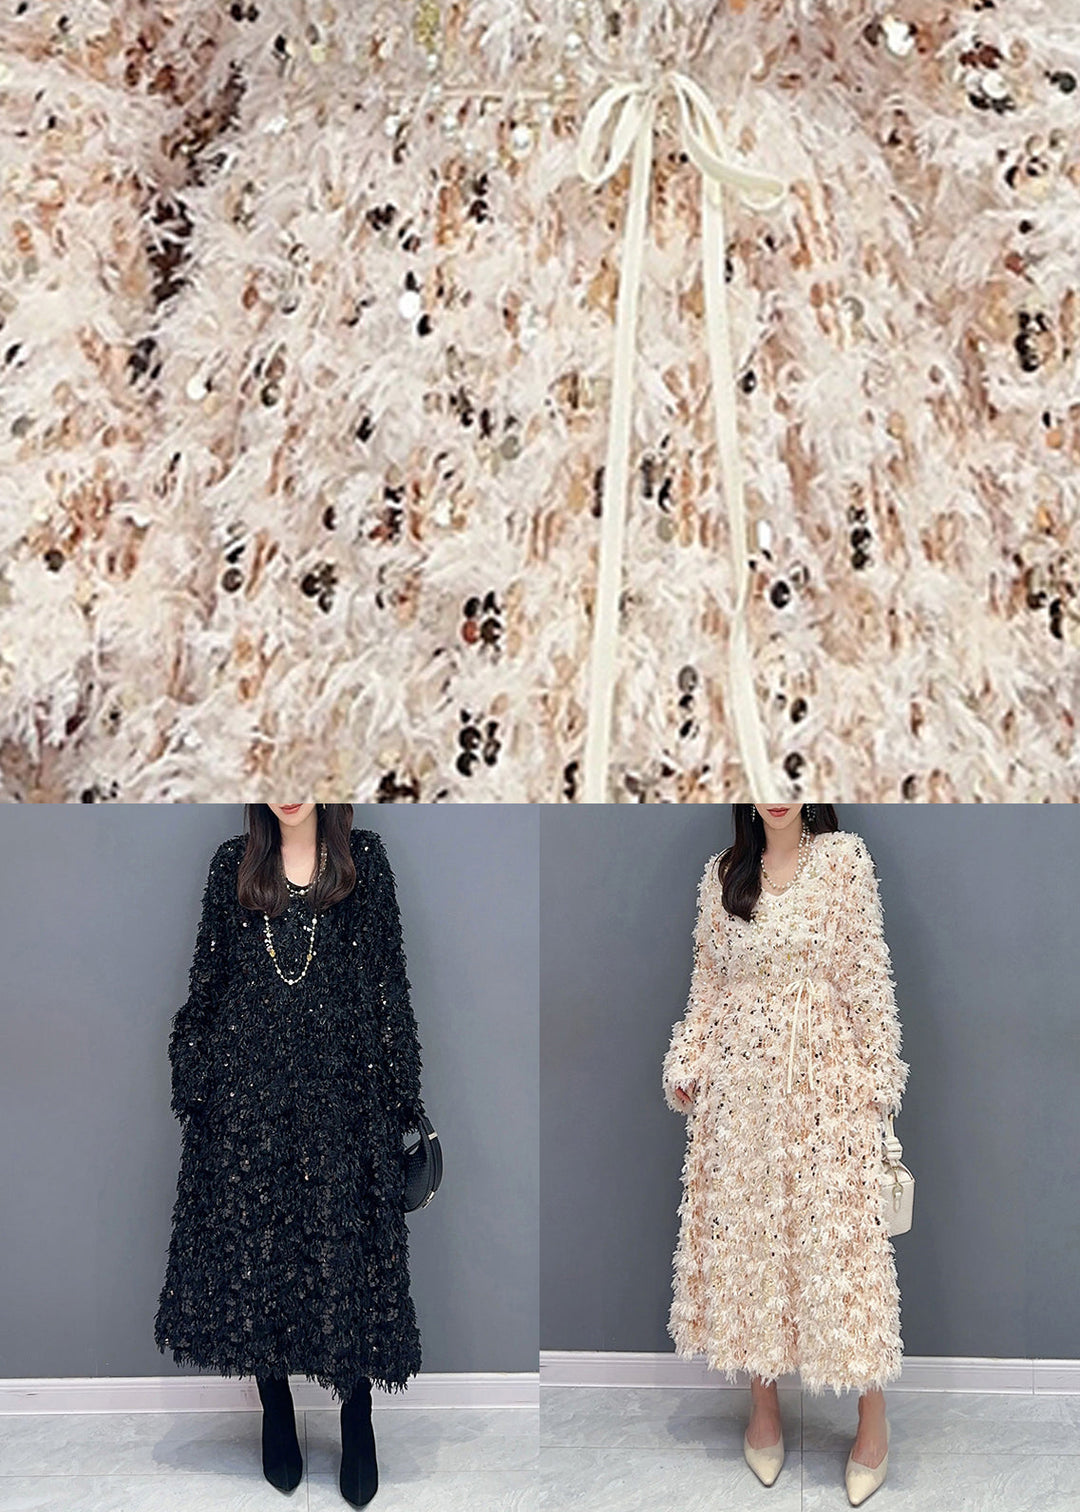 French Beige Sequins Patchwork Fuzzy Fur Fluffy Dresses Long Sleeve